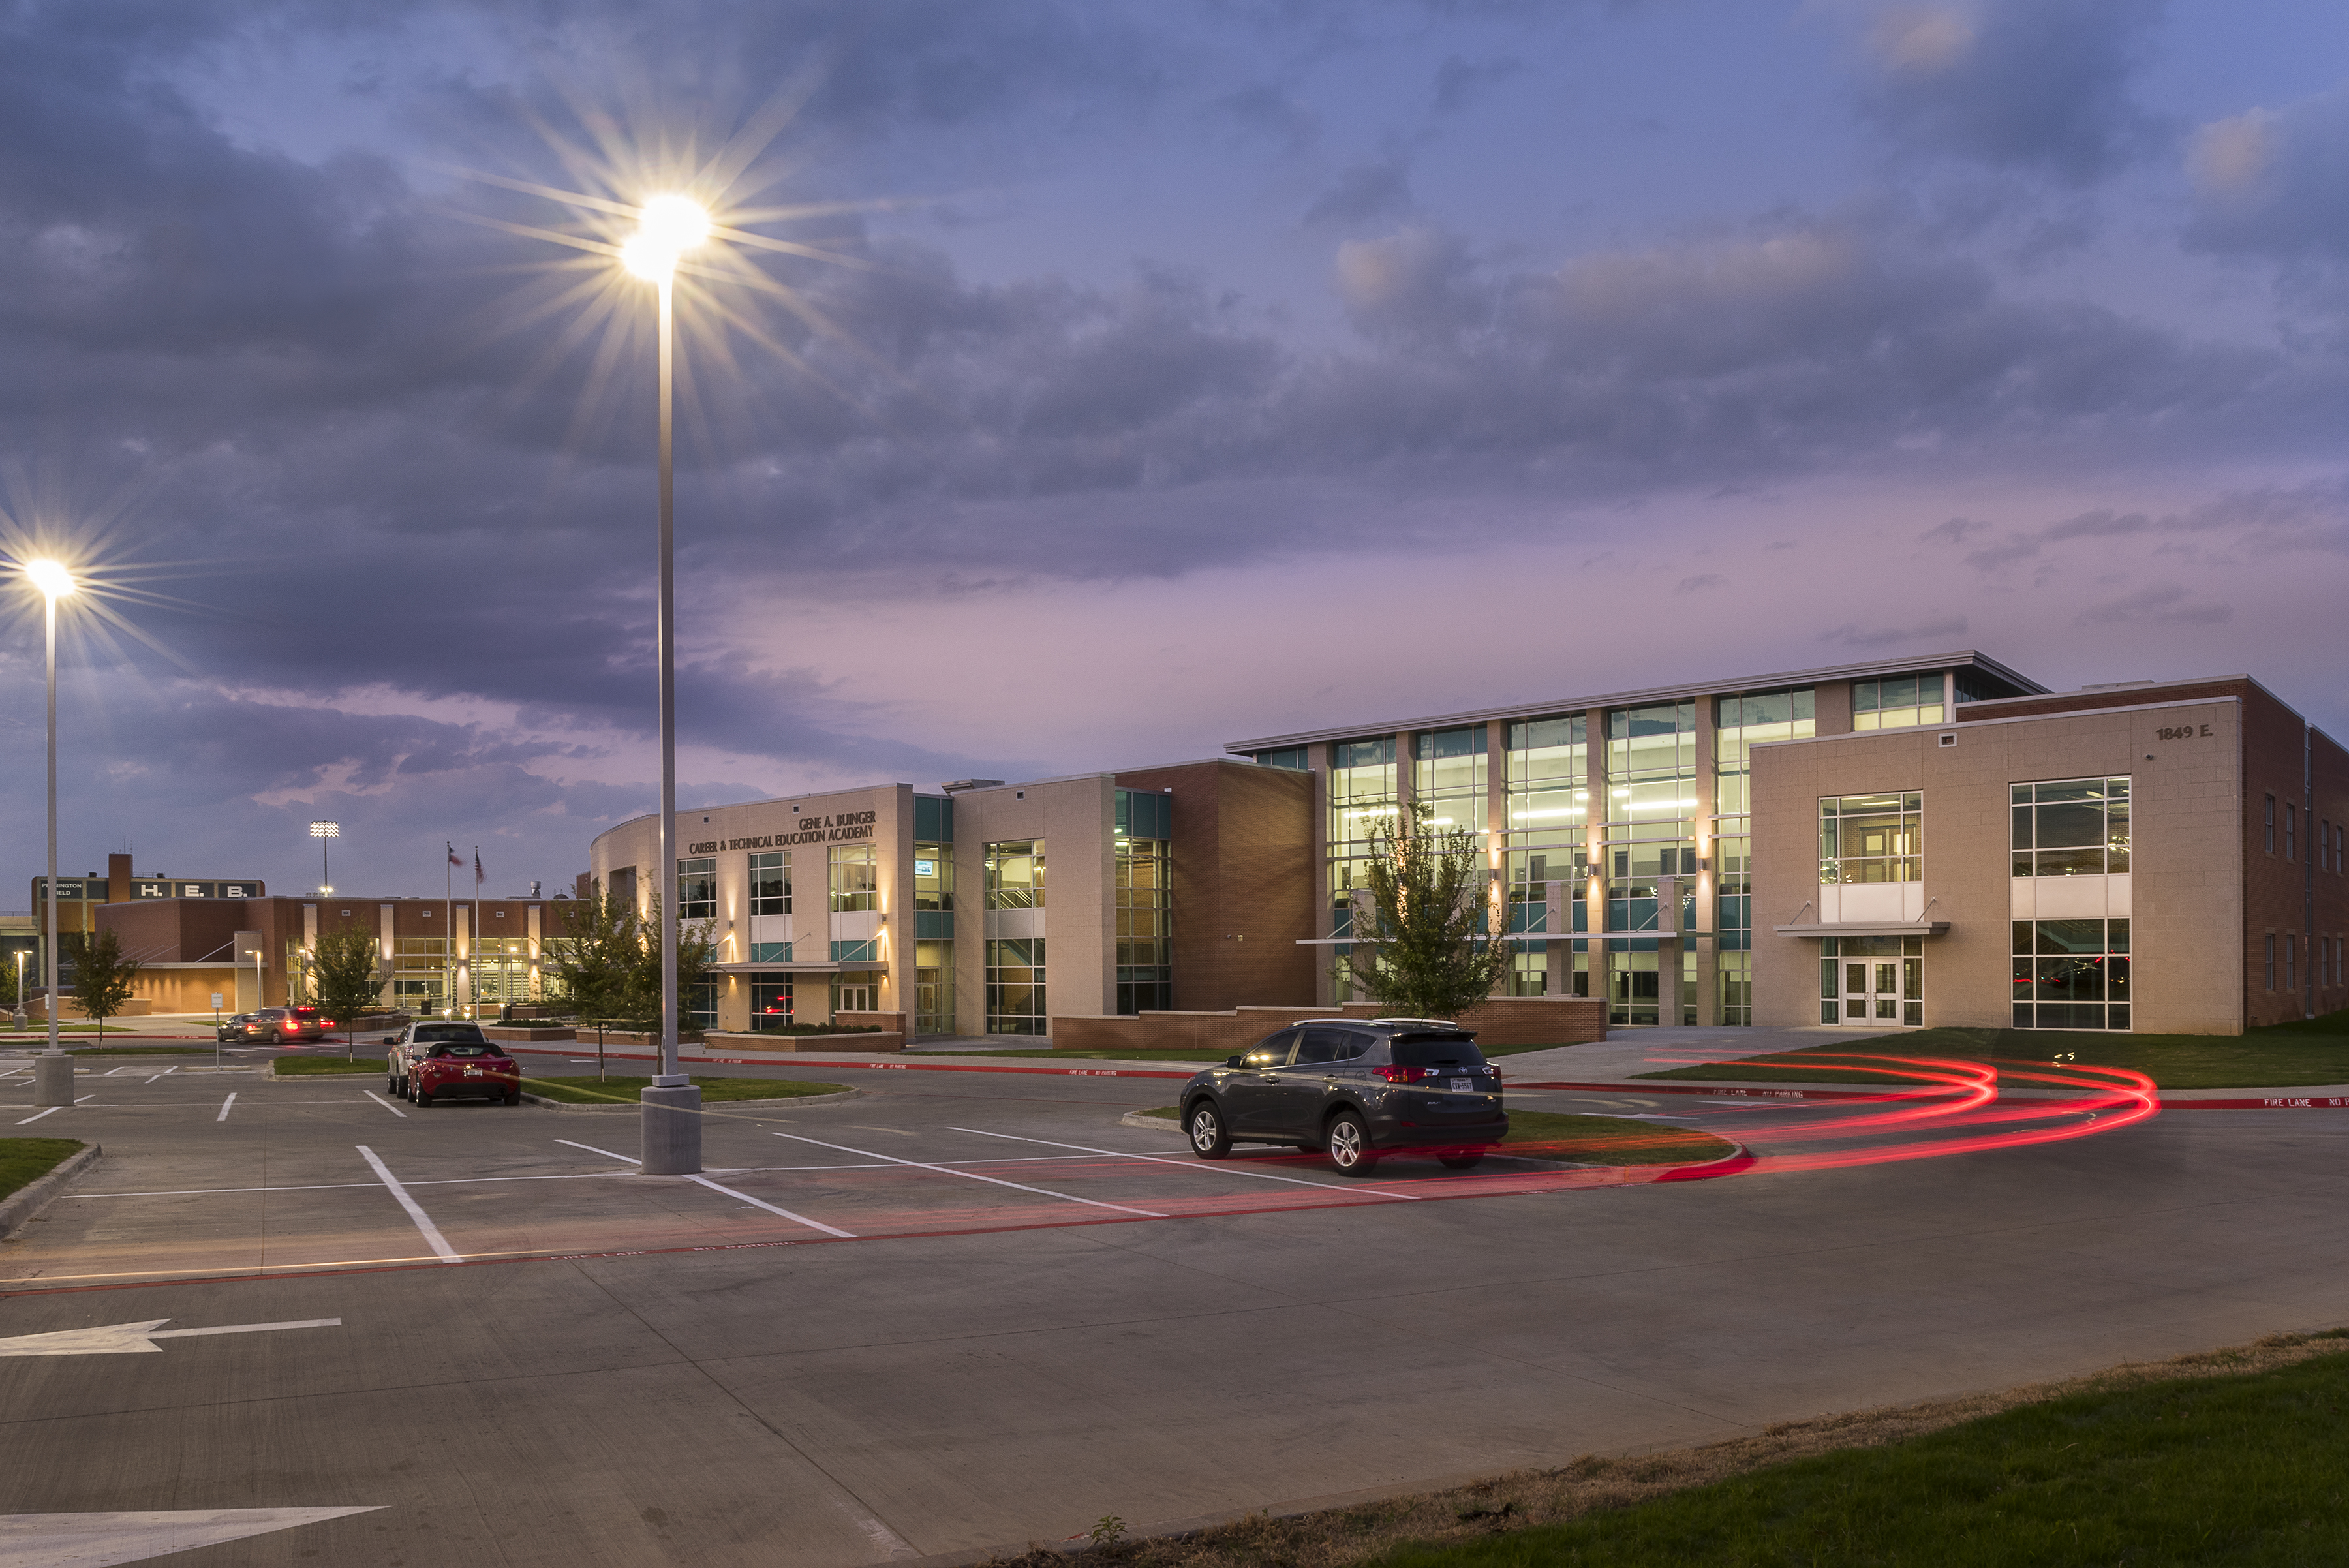  Hurst-Euless-Bedford ISD | The Gene A. Buinger Career and Technical Education Academy category